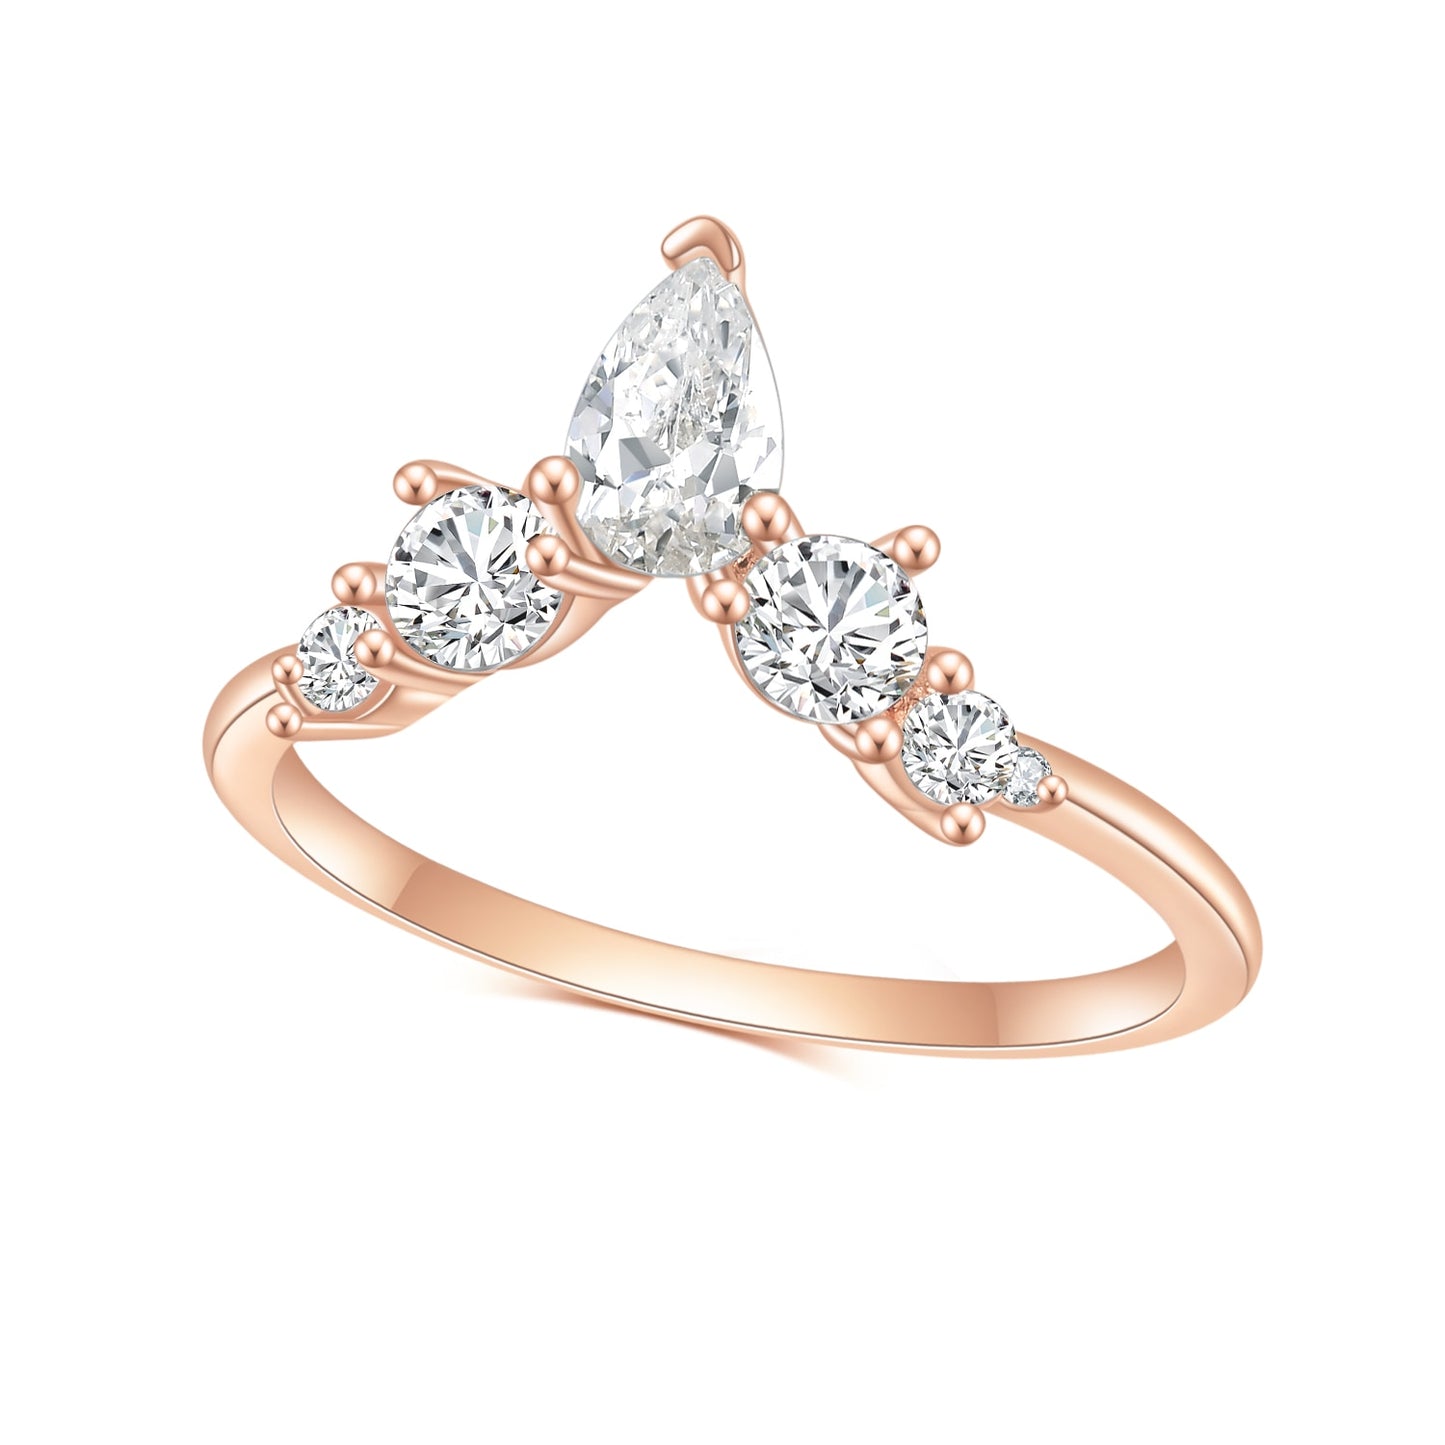 A rose gold chevron wedding ring with a marquise and round gems on either side.